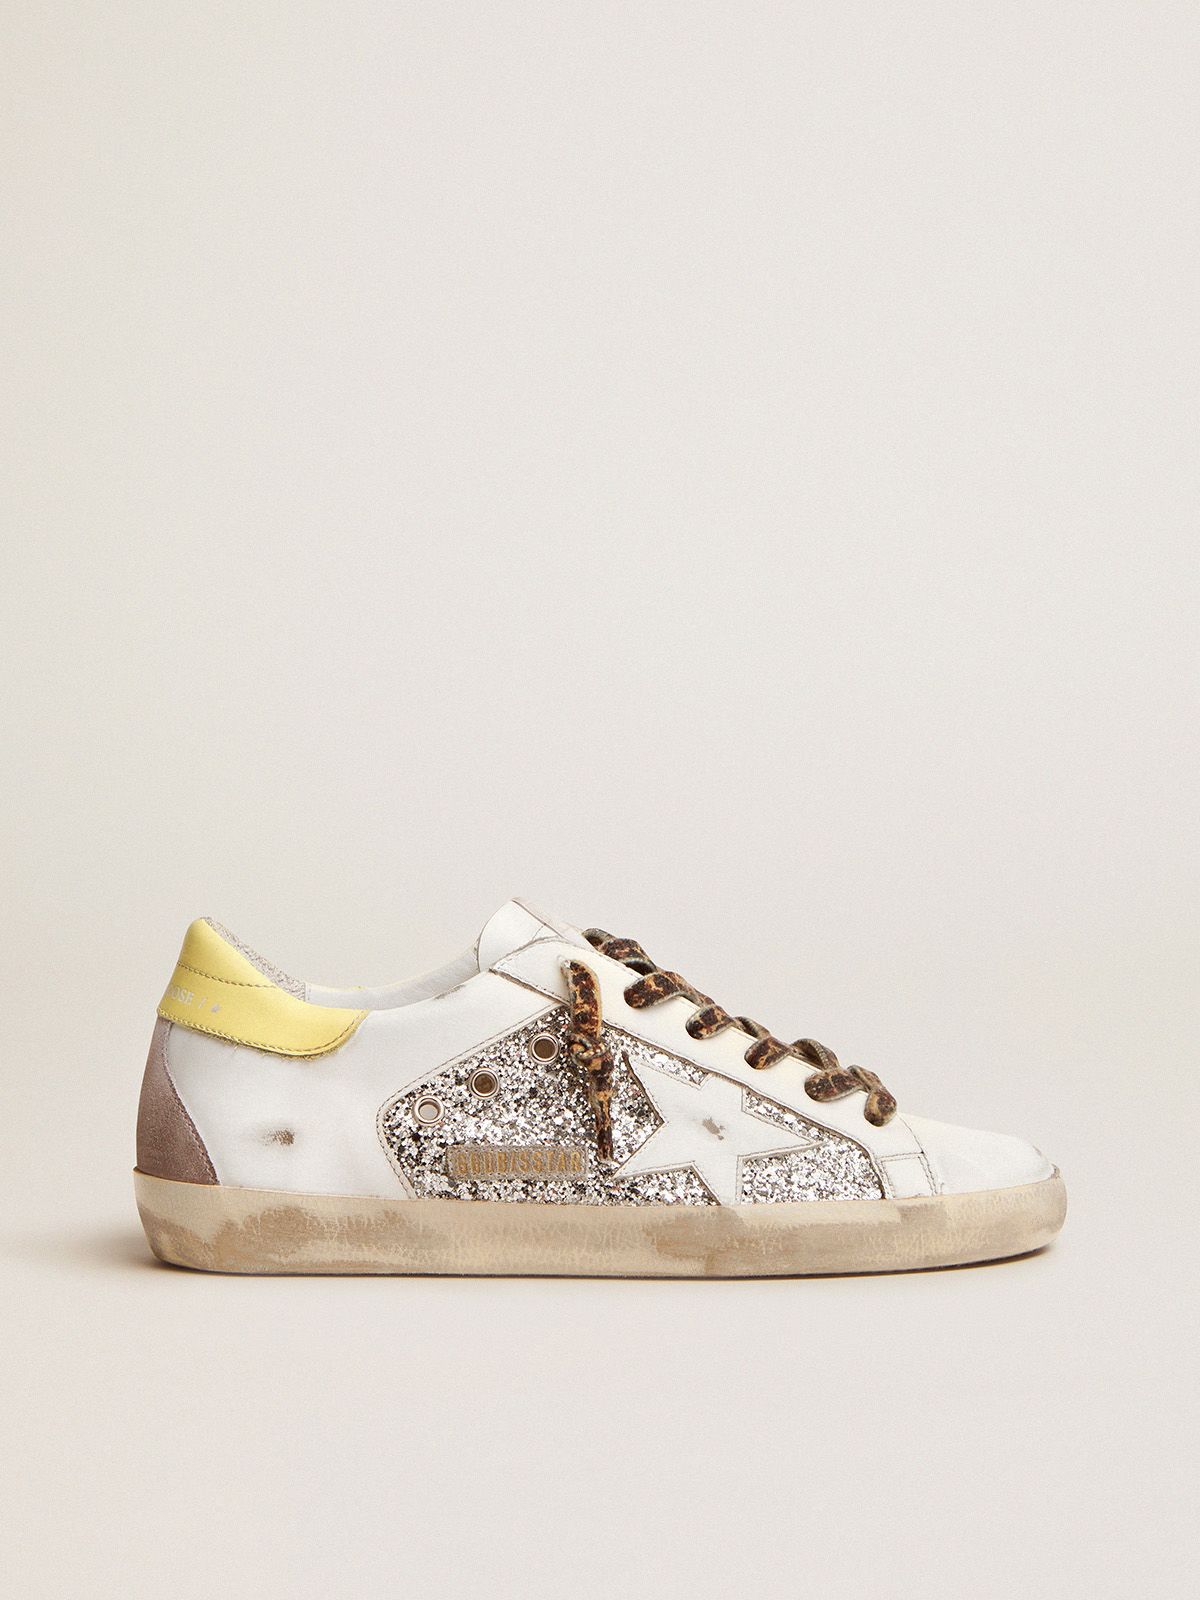 golden goose with tab and Super-Star LTD Sneakers leather colorful glitter in heel